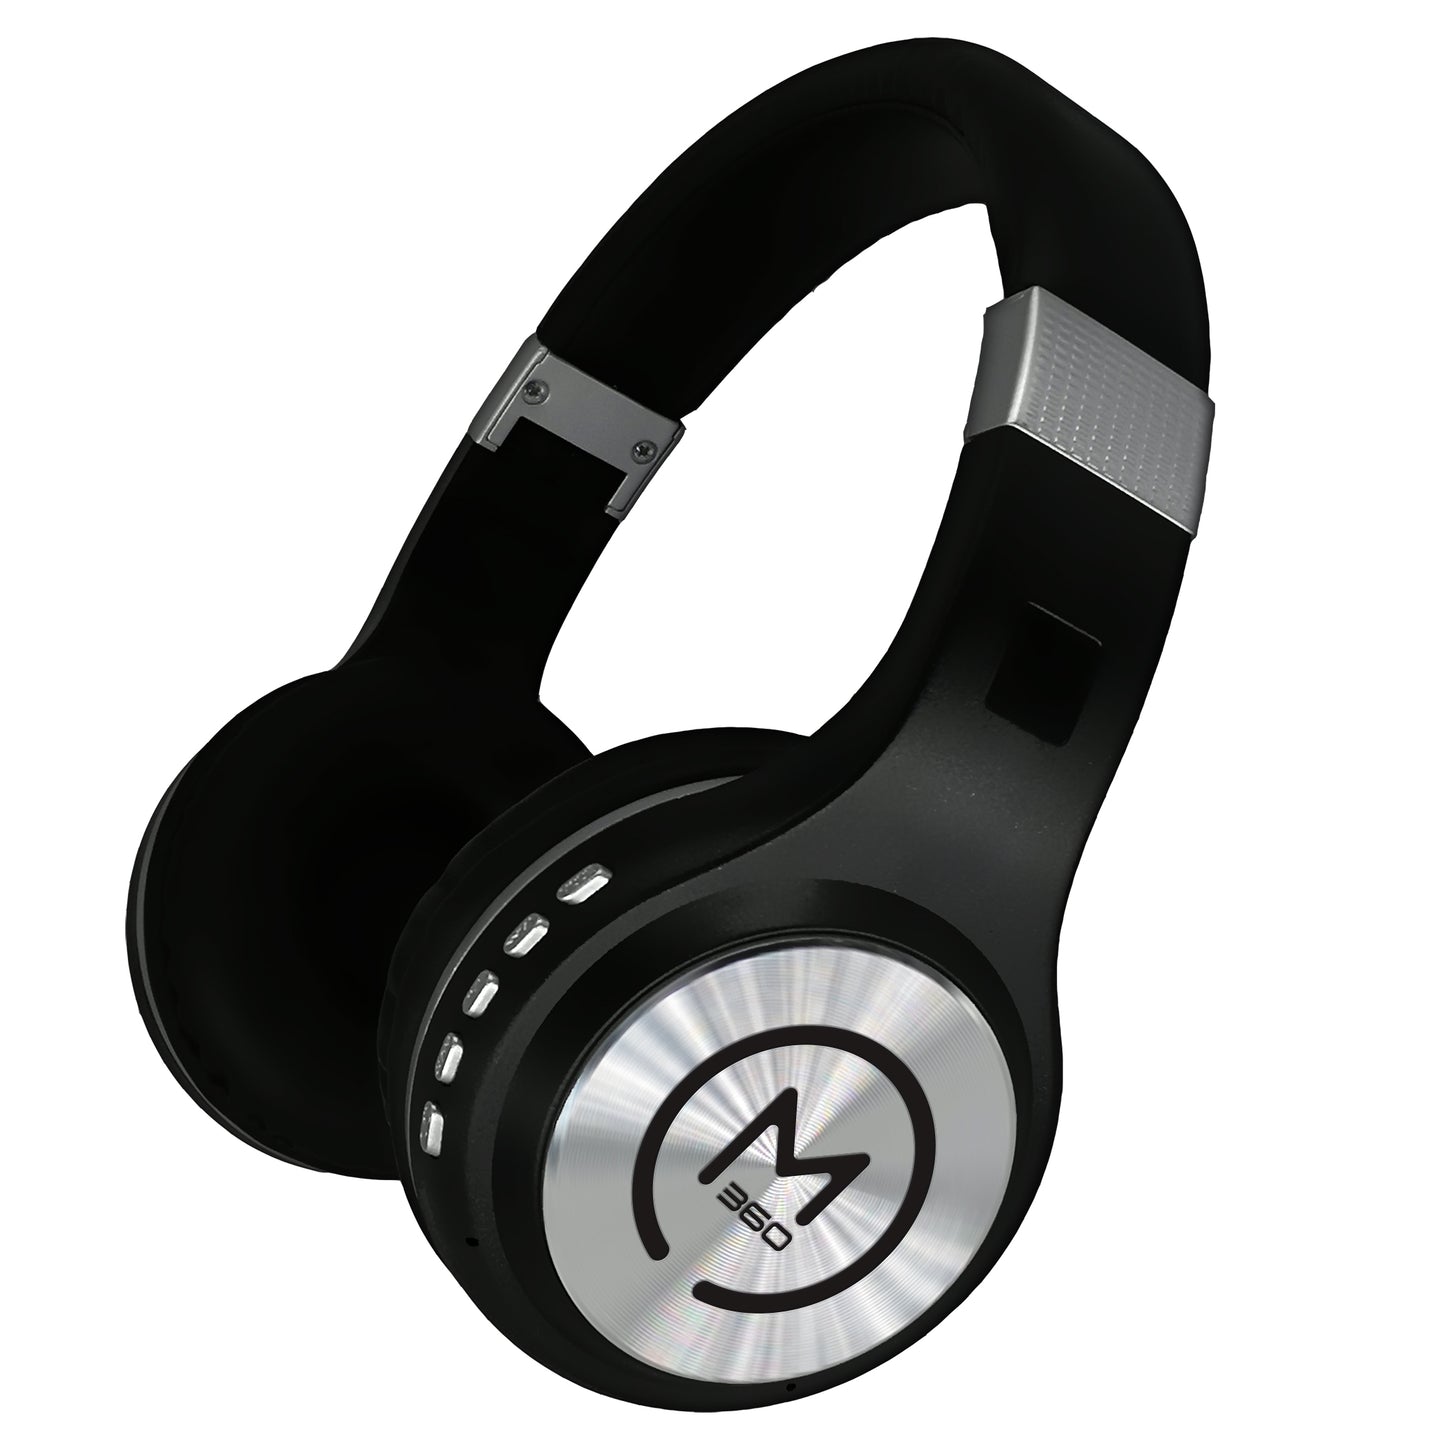 Photo of Morpheus 360 Serenity Wireless Over Ear Headphones shows Power on/off button, Volume control buttons, Play/Pause, and Mode button. Black with Silver accents.